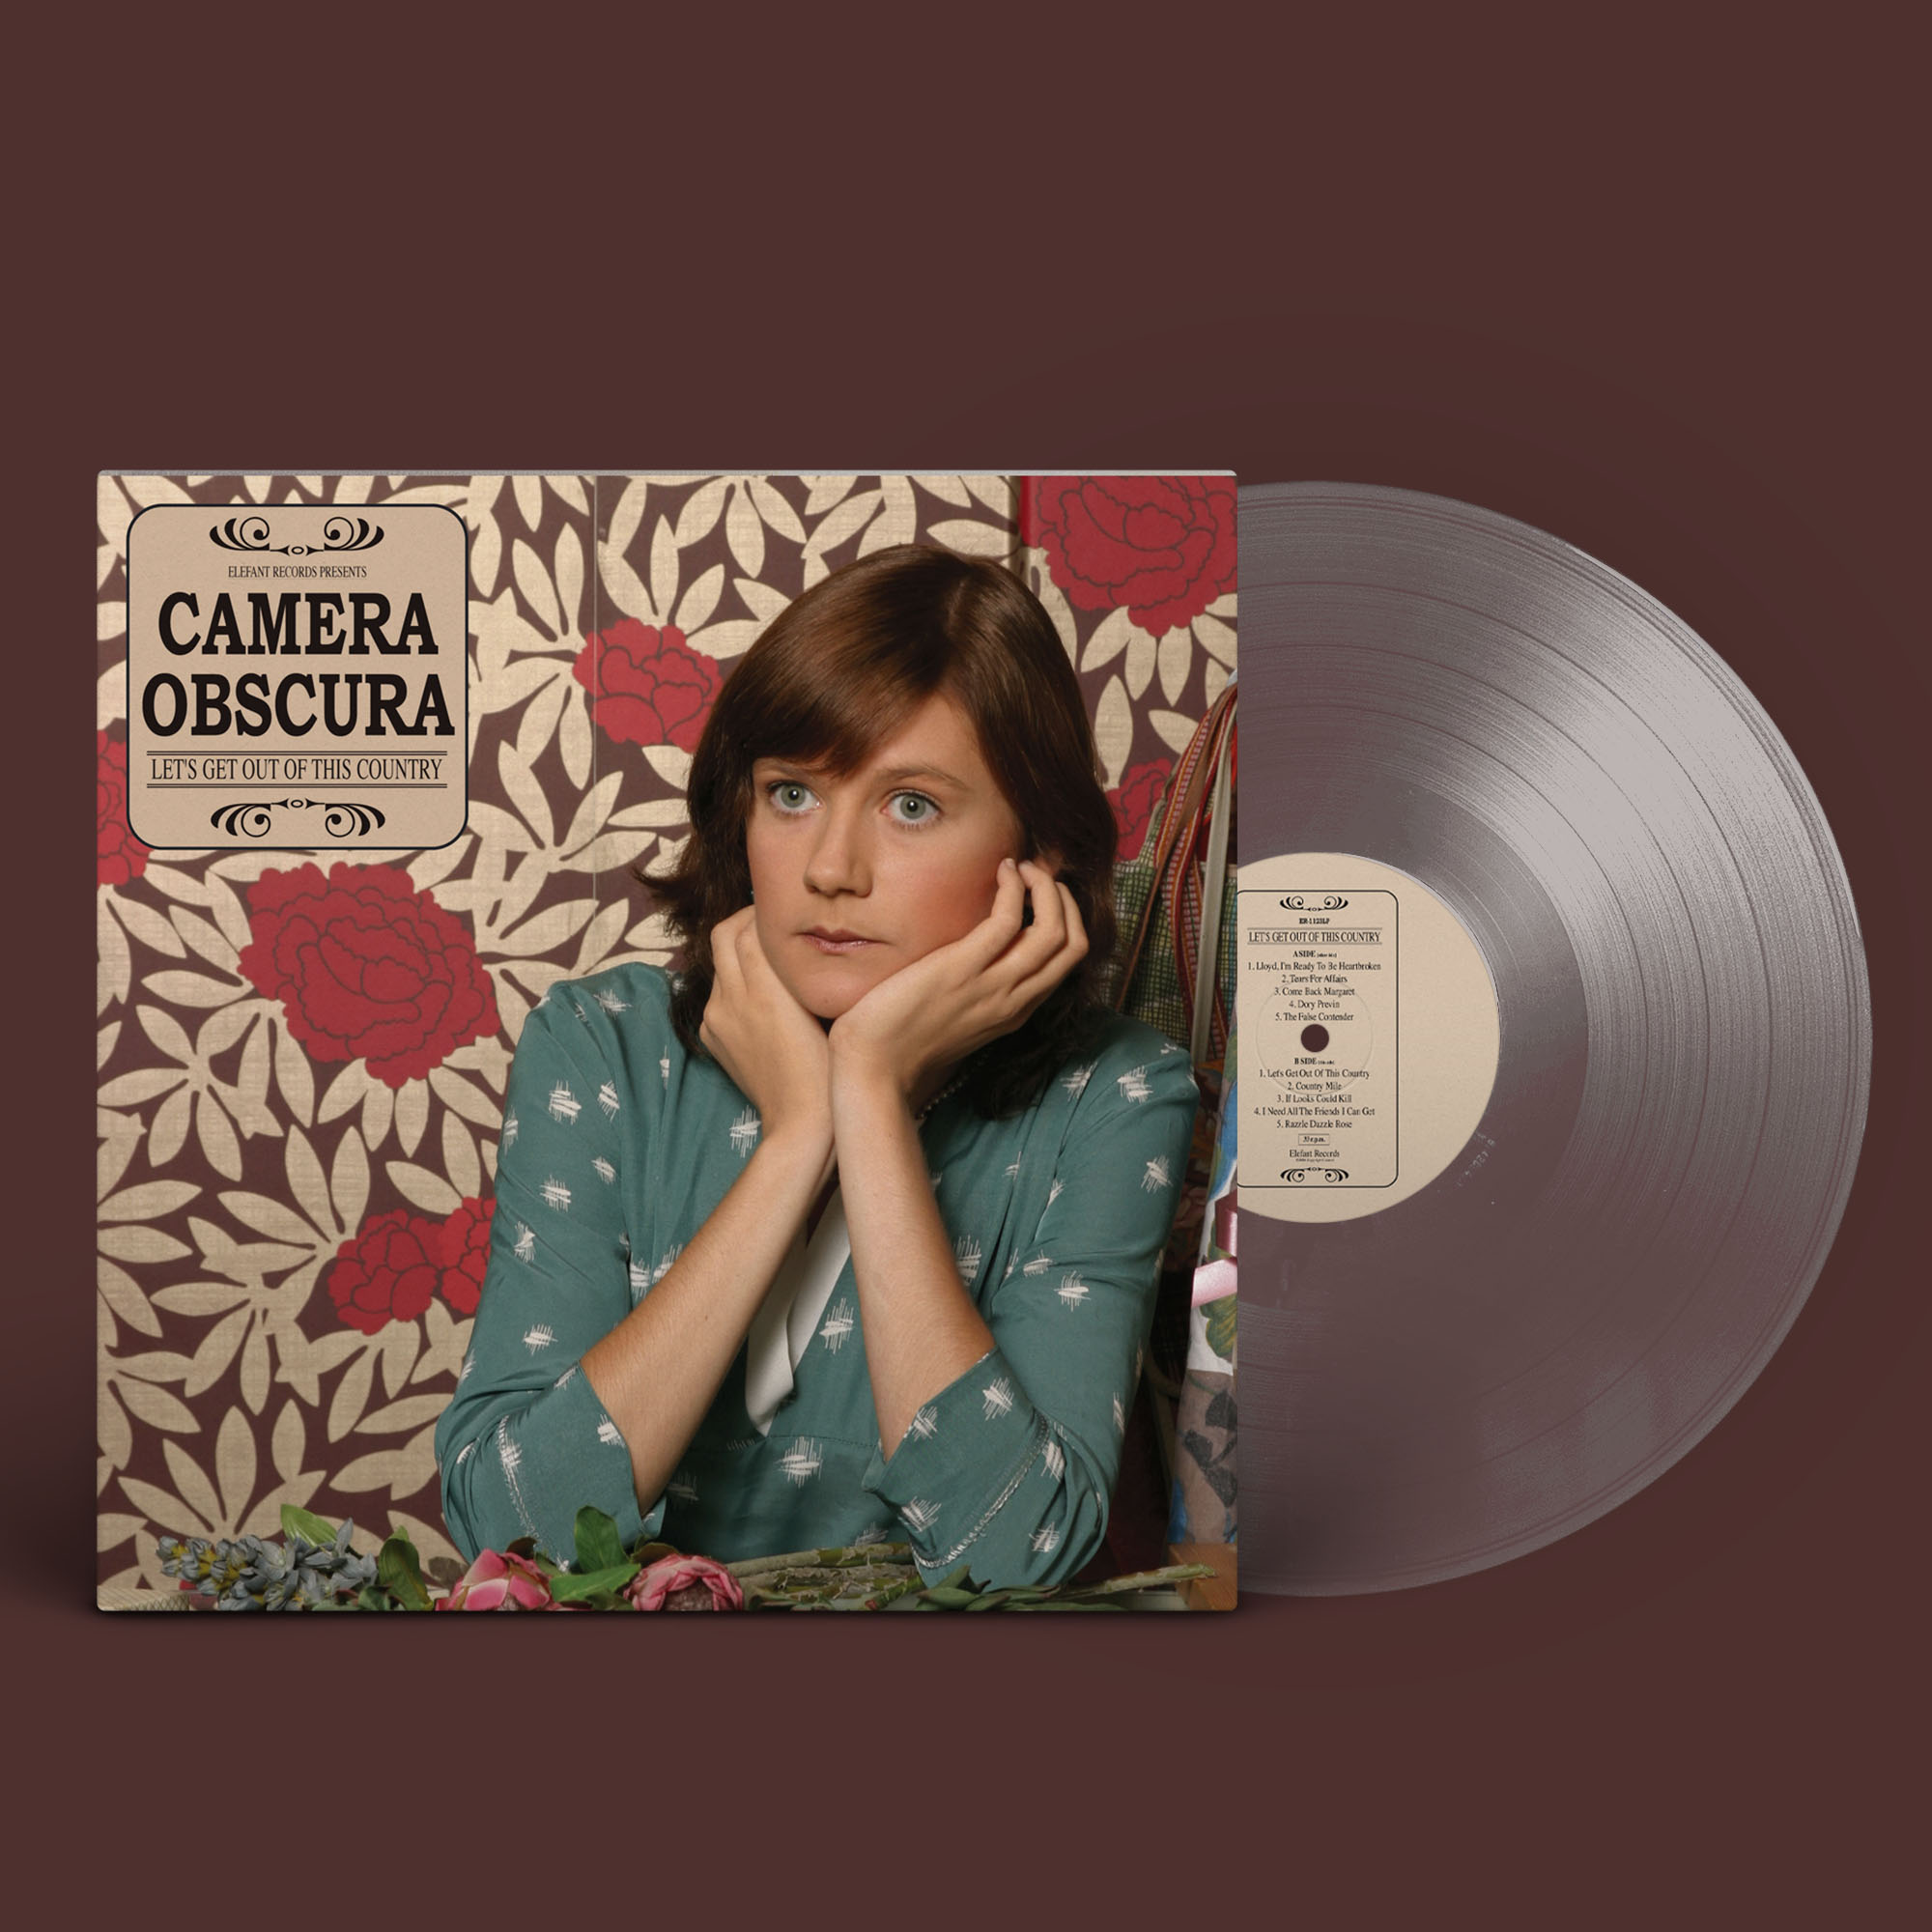 CAMERA OBSCURA: REISSUE "Let's Get Out Of This Country" in Clear Vinyl 